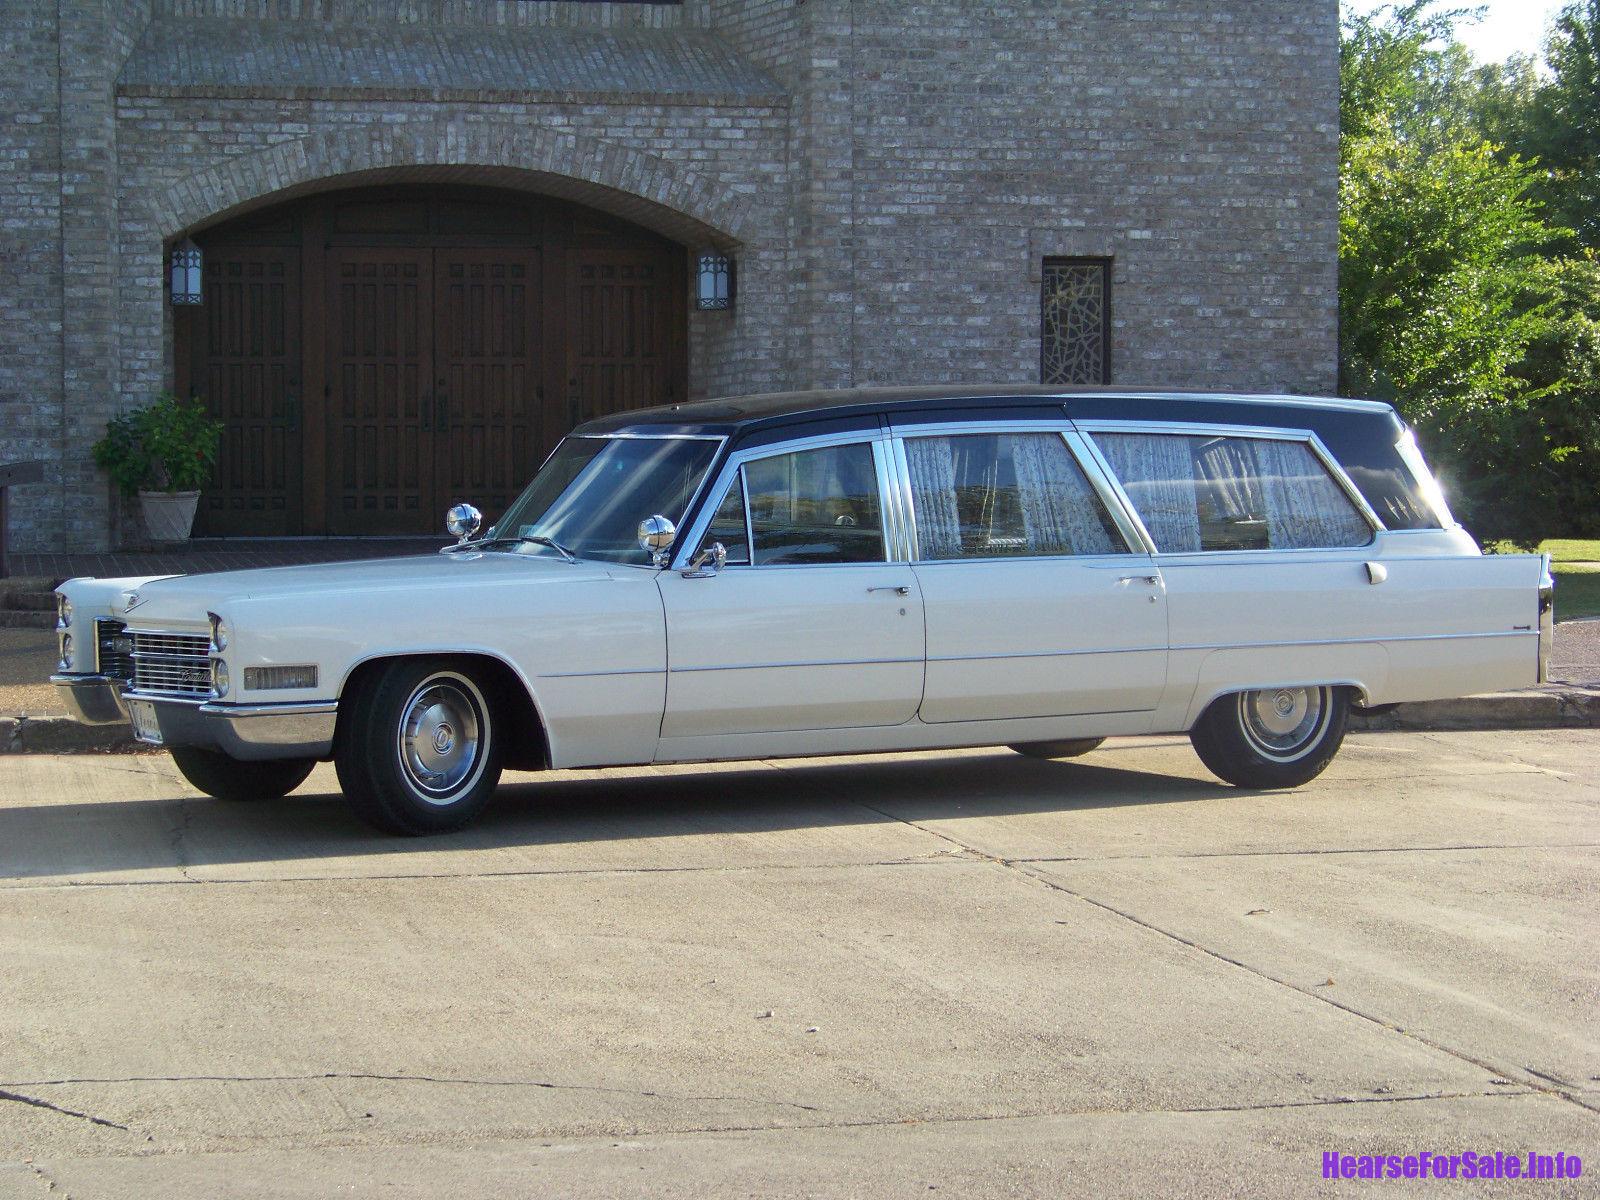 1966 Cadillac Superior Royale Coach (Martin Luther King Jr.'s hearse)